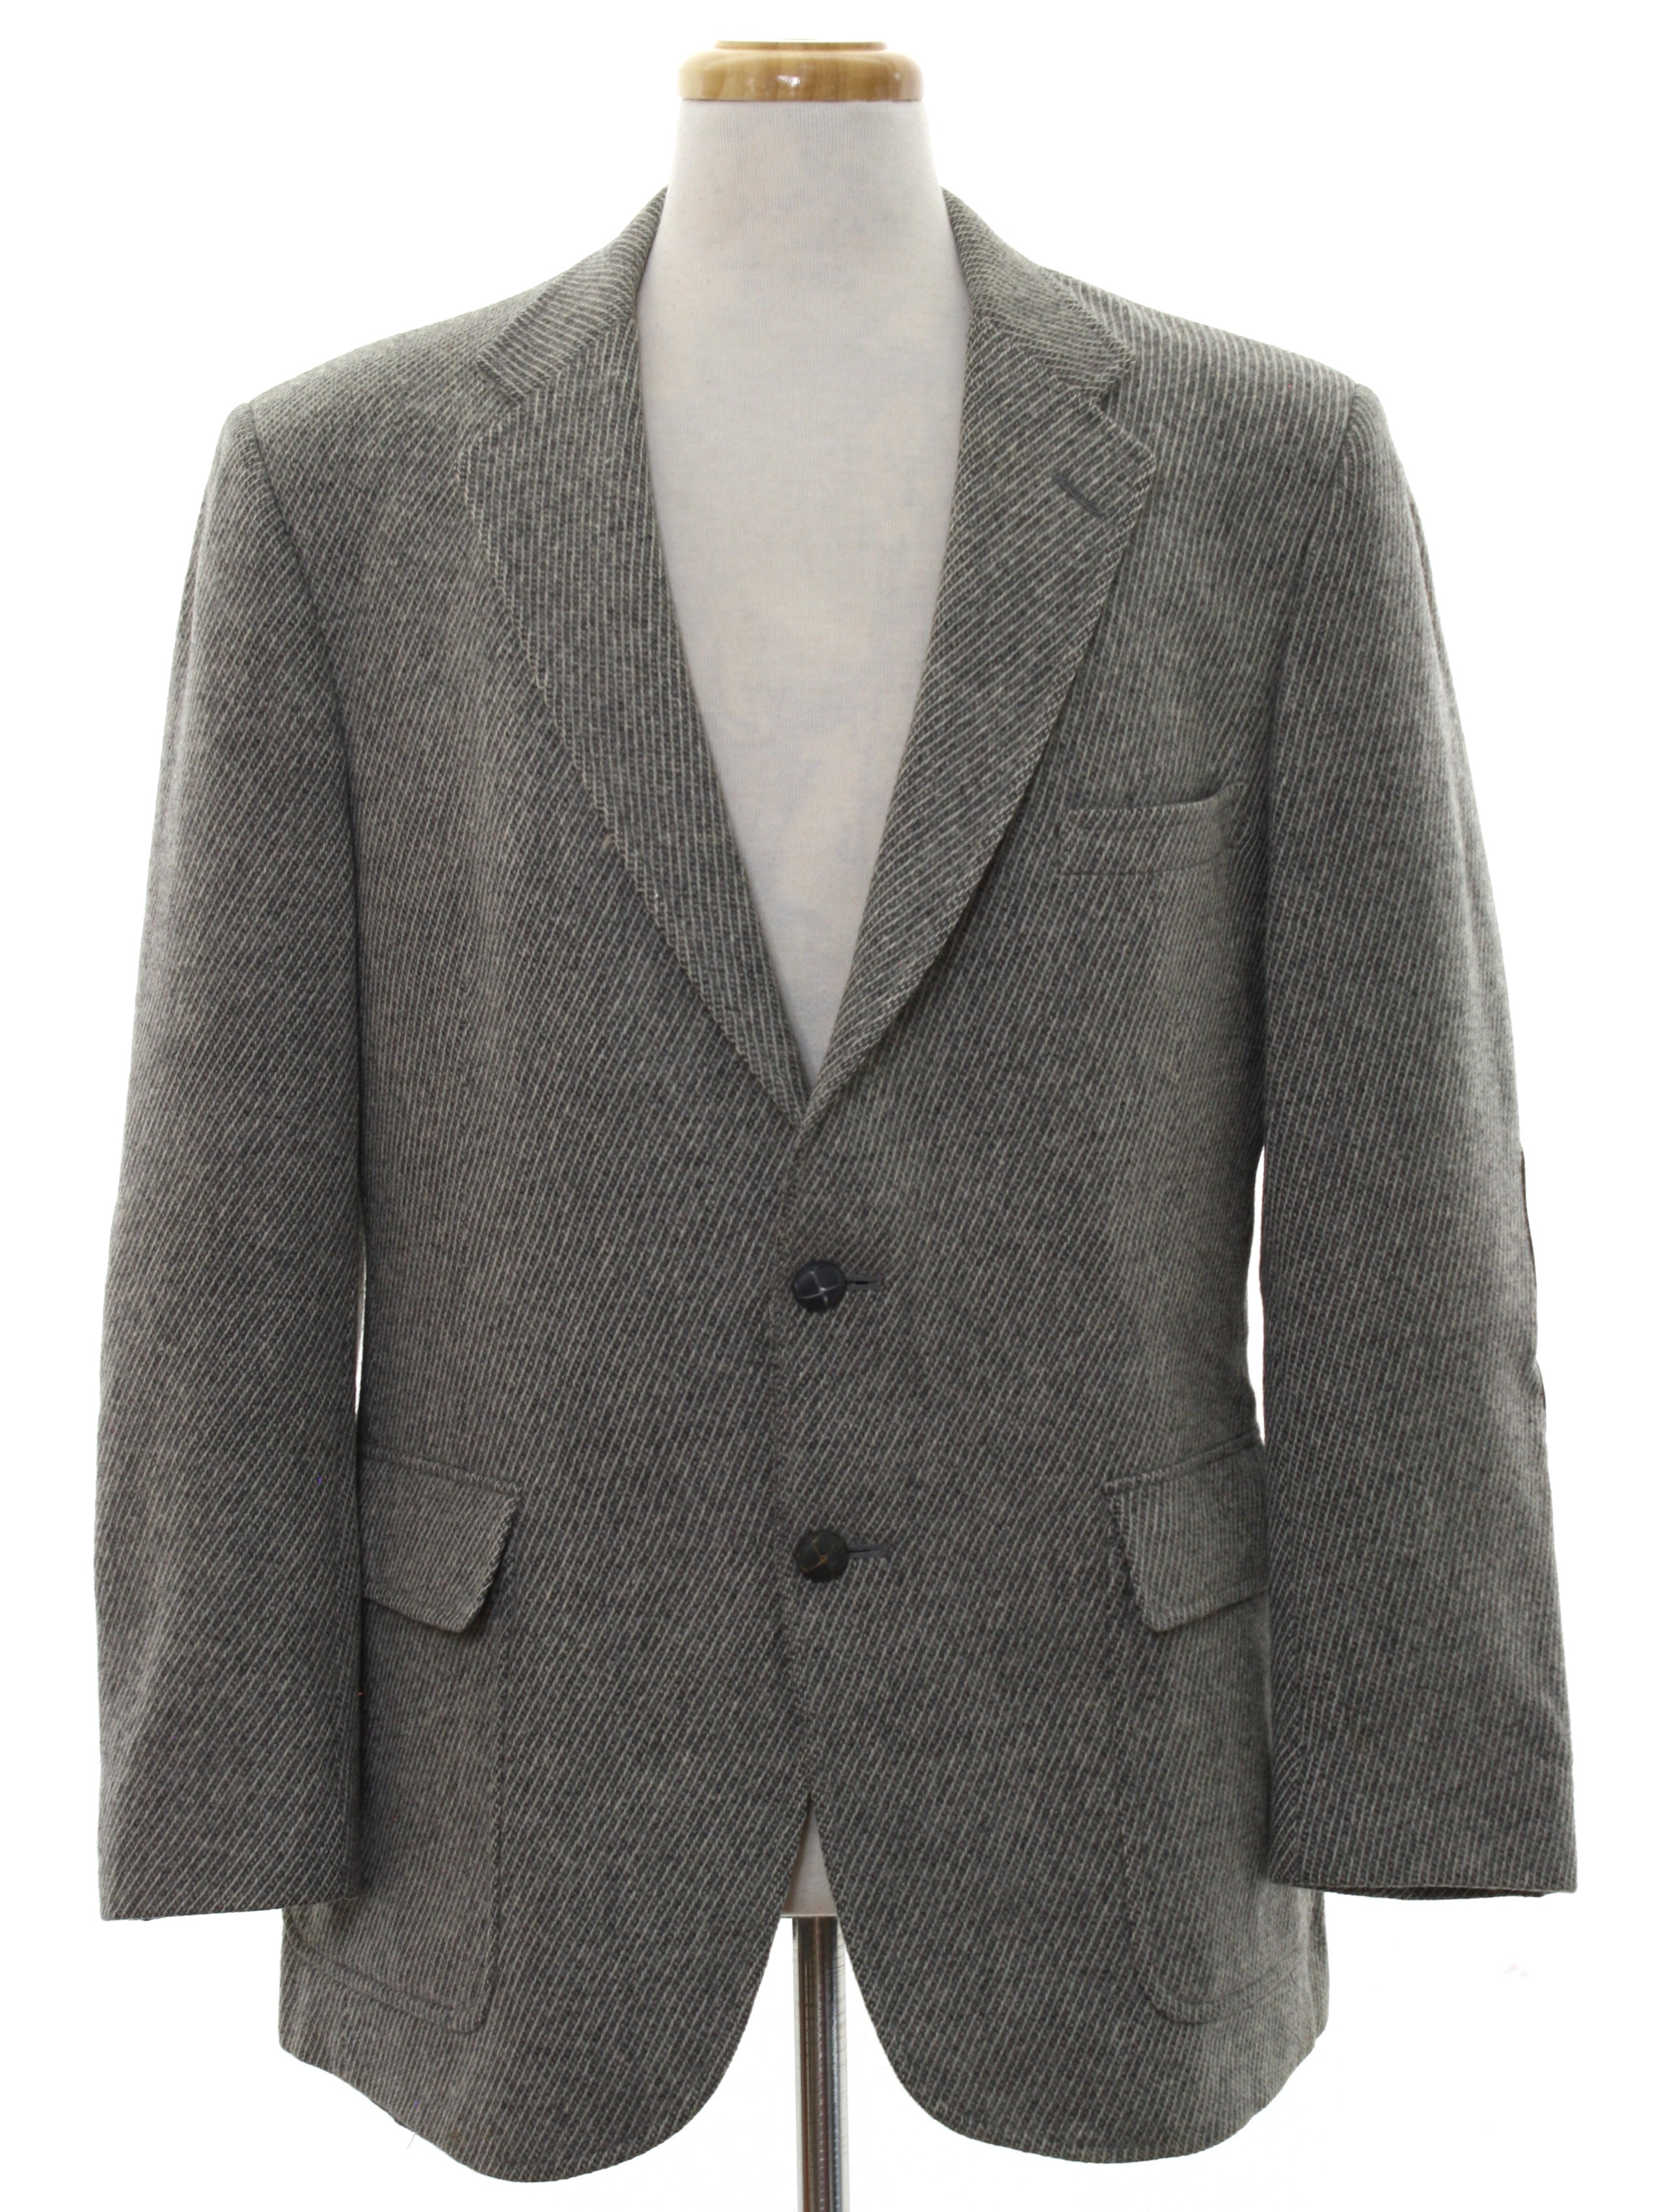 1980s Austin Reed Jacket: 80s -Austin Reed- Mens grey and white ...